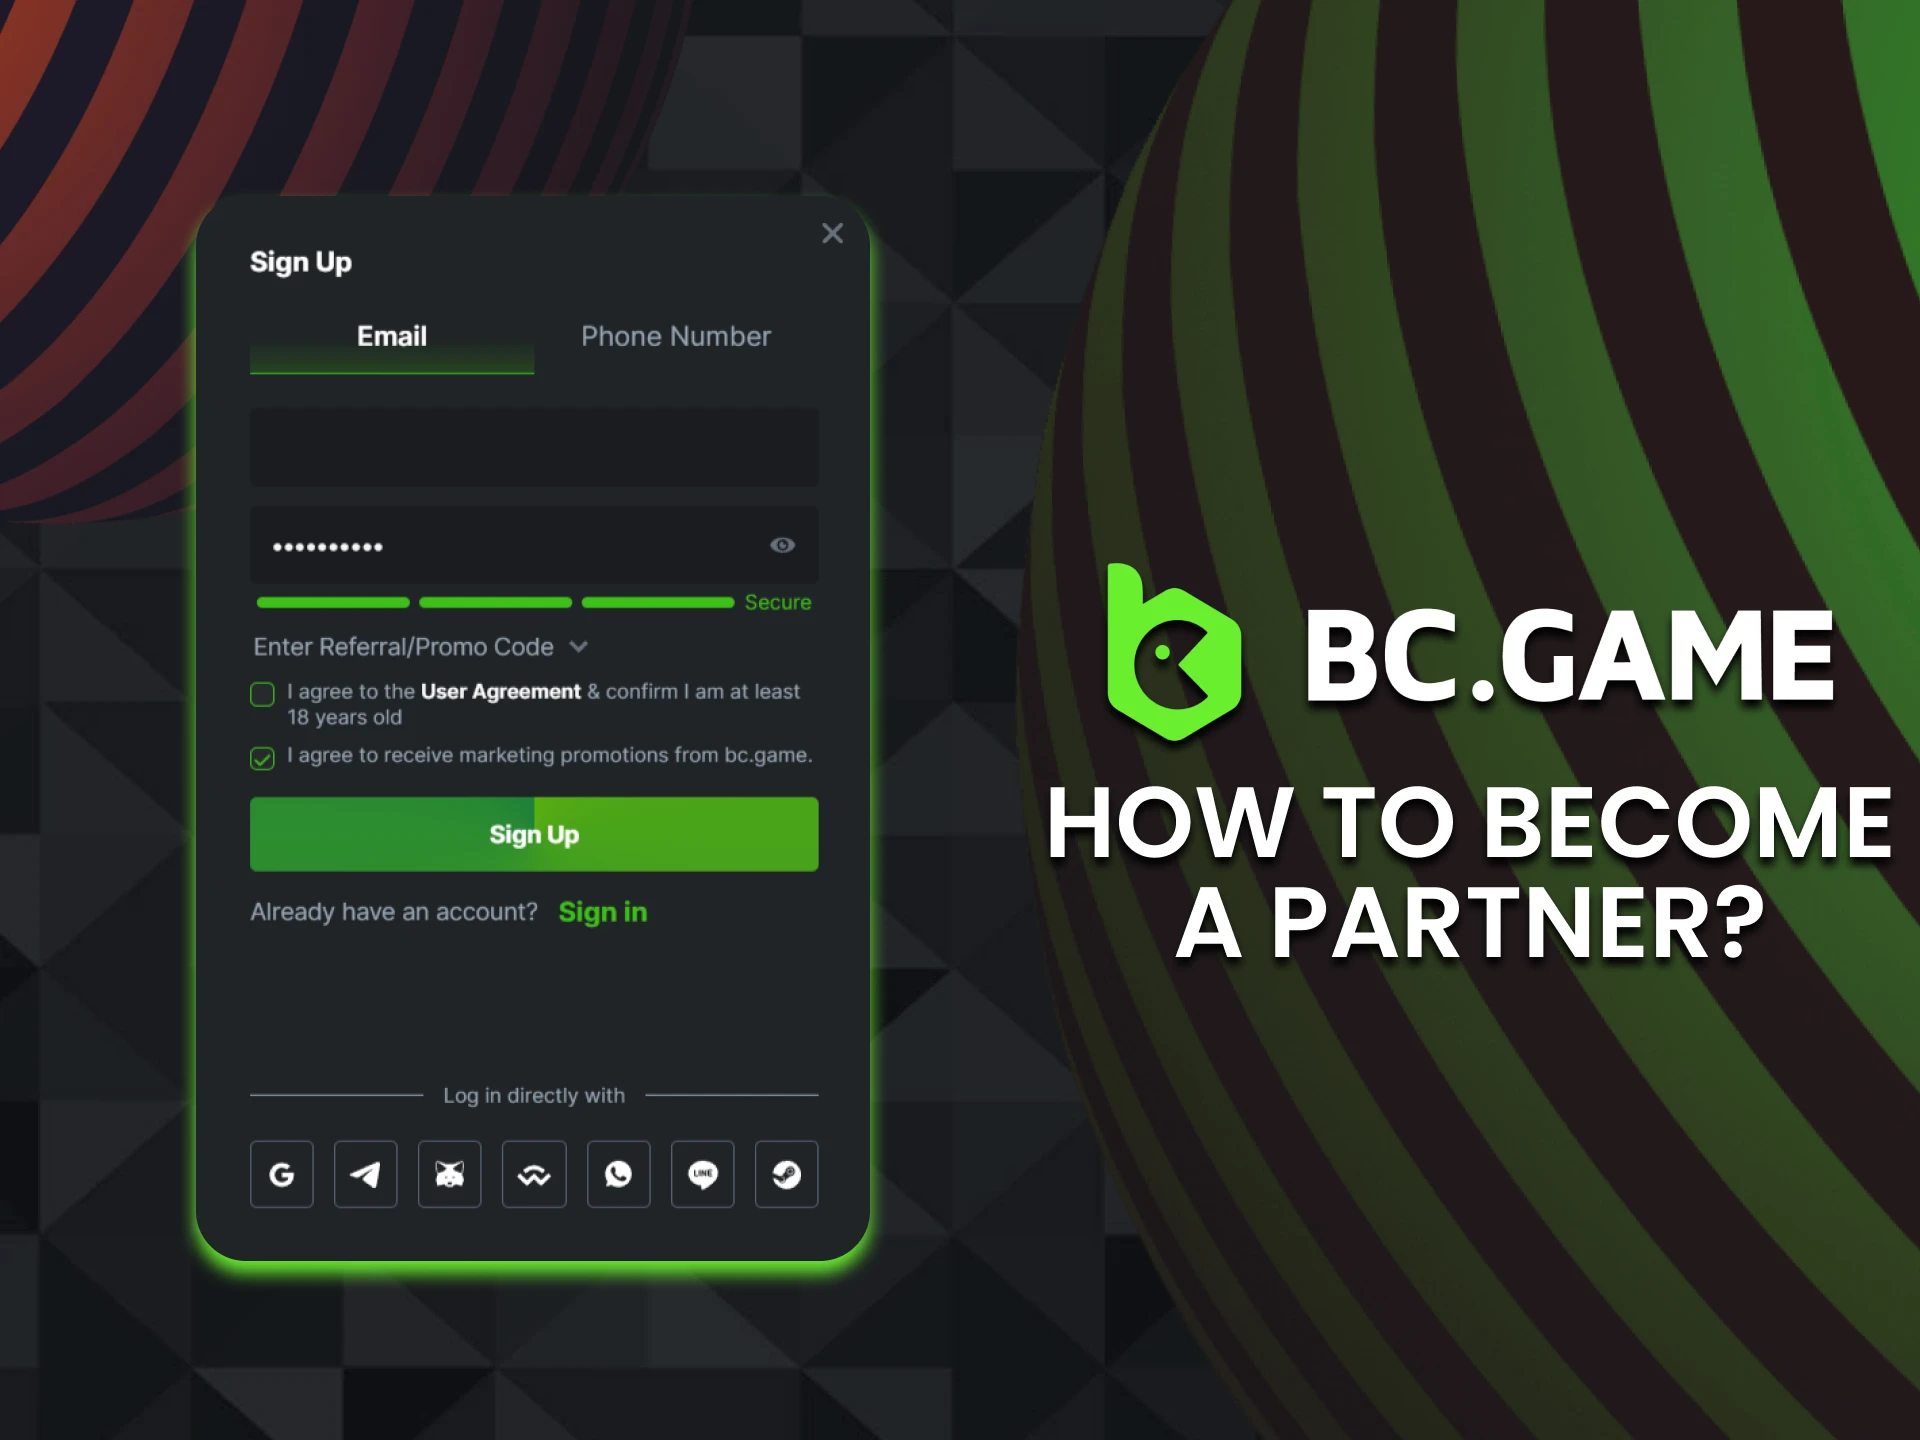 Carefully consider how to become a member of the BCGame affiliate program.